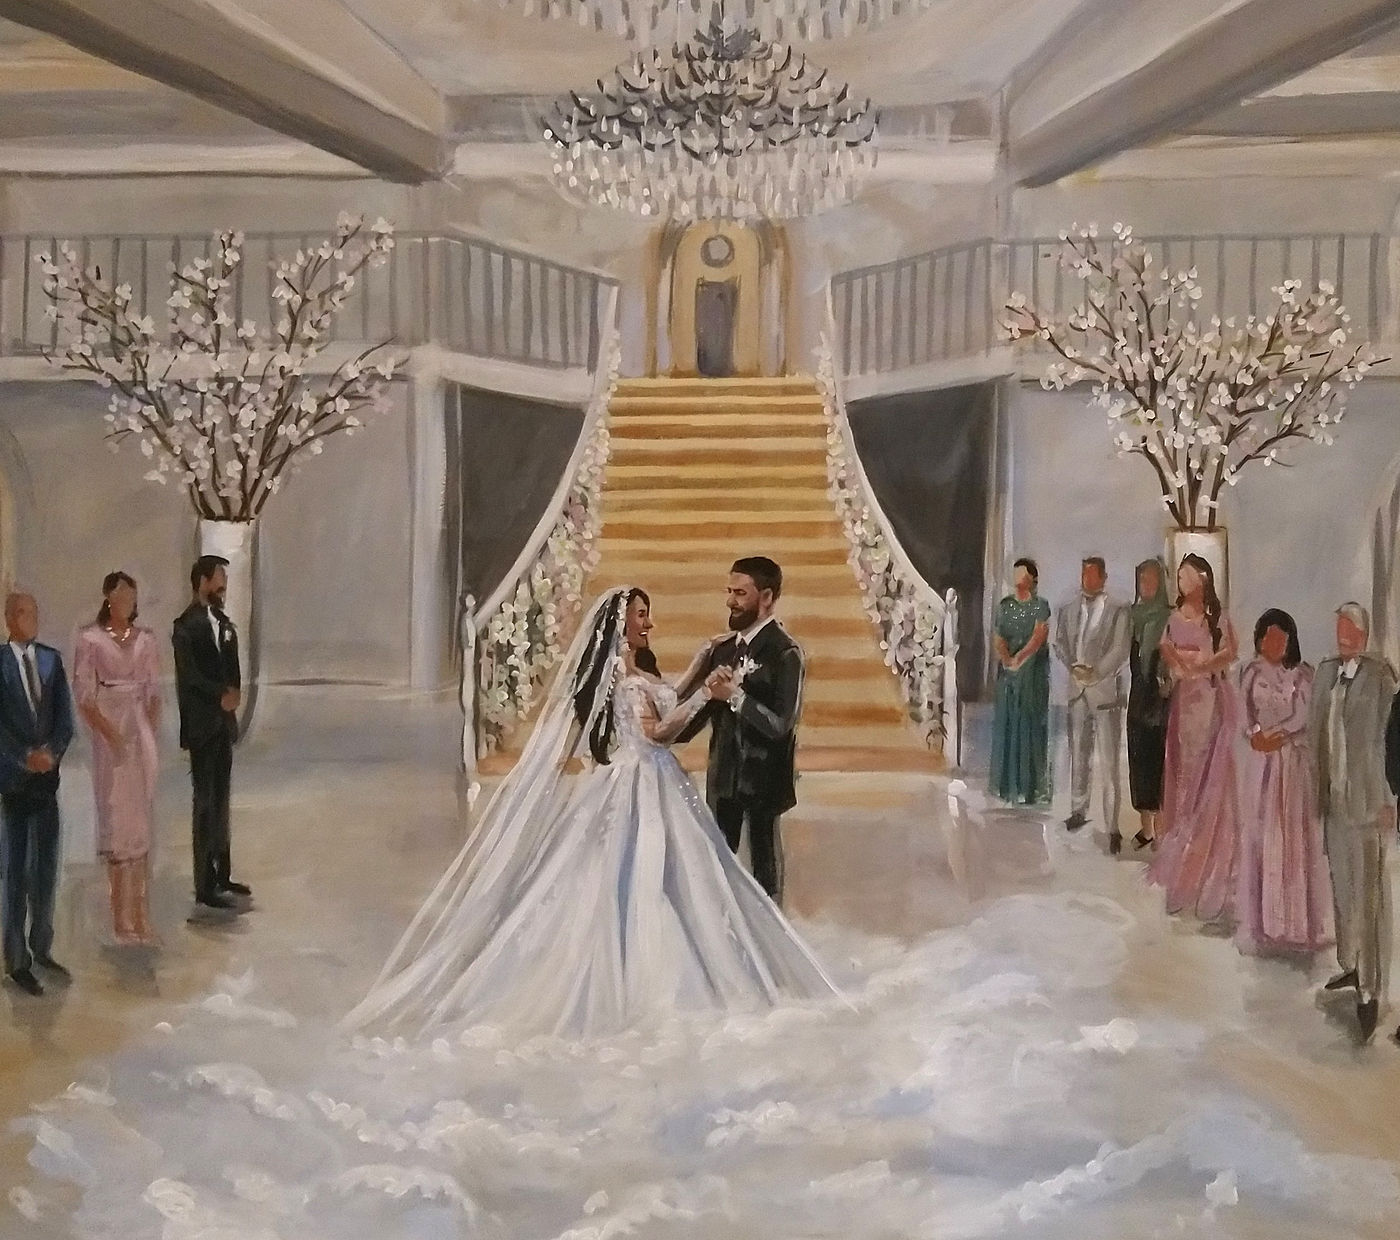 FAQ about live wedding painting. This one's for all the nearlyweds out… |  by Renée / neetje | Medium